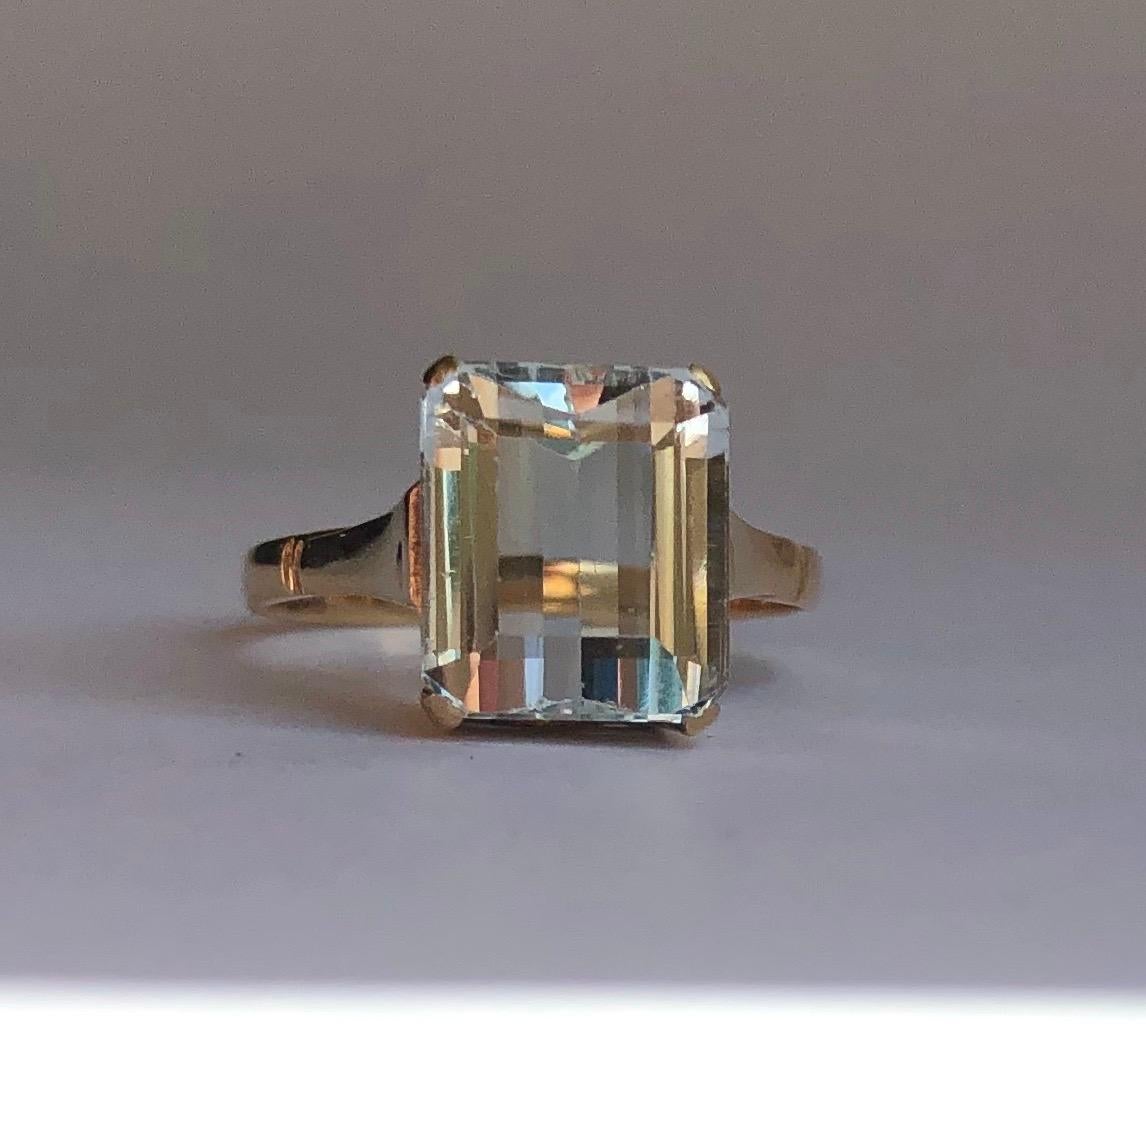 This stunning aqua is pale in colour and has a cut which gives a hall of mirrors effect. The shoulders, setting and band is modelled in 9ct gold and is very simple in design. The stone measures 2.5carat. 

Ring Size: K 1/2 or 5 1/2 
Height Off